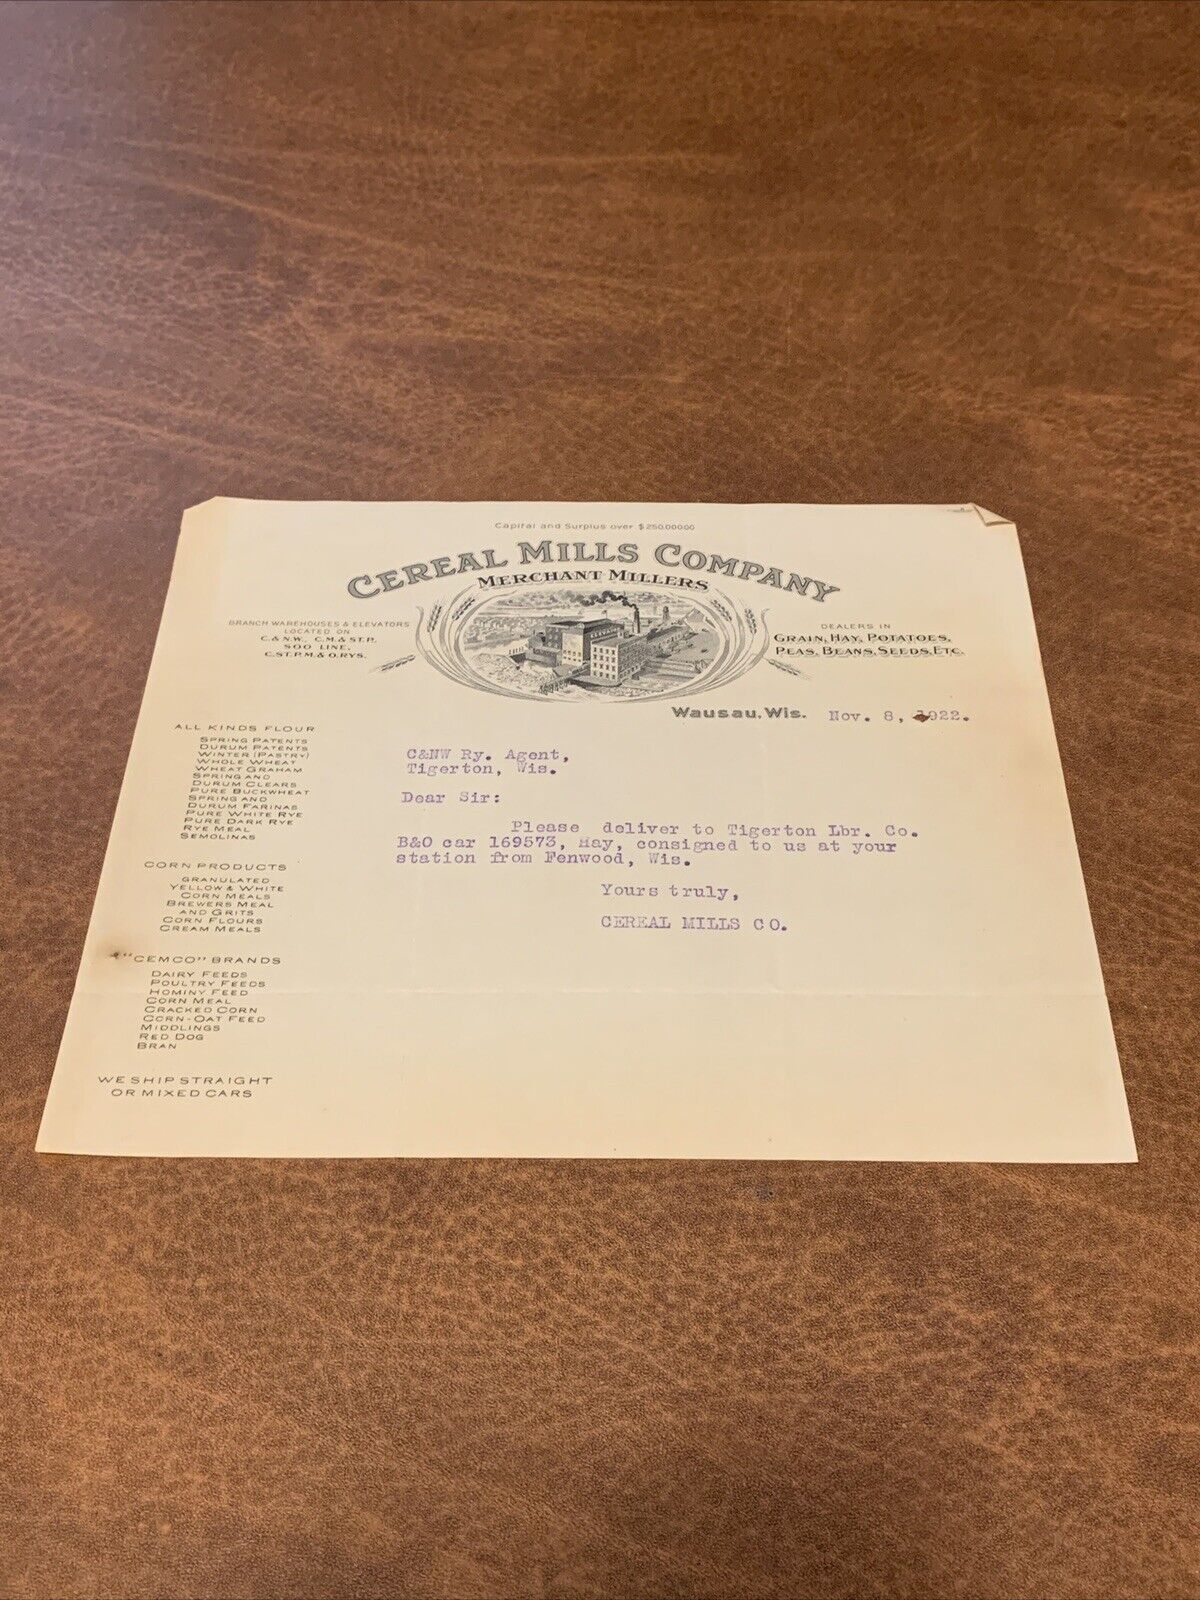 Rare Antique Cereal Mills Company Wausau Wisconsin 1922 Document 